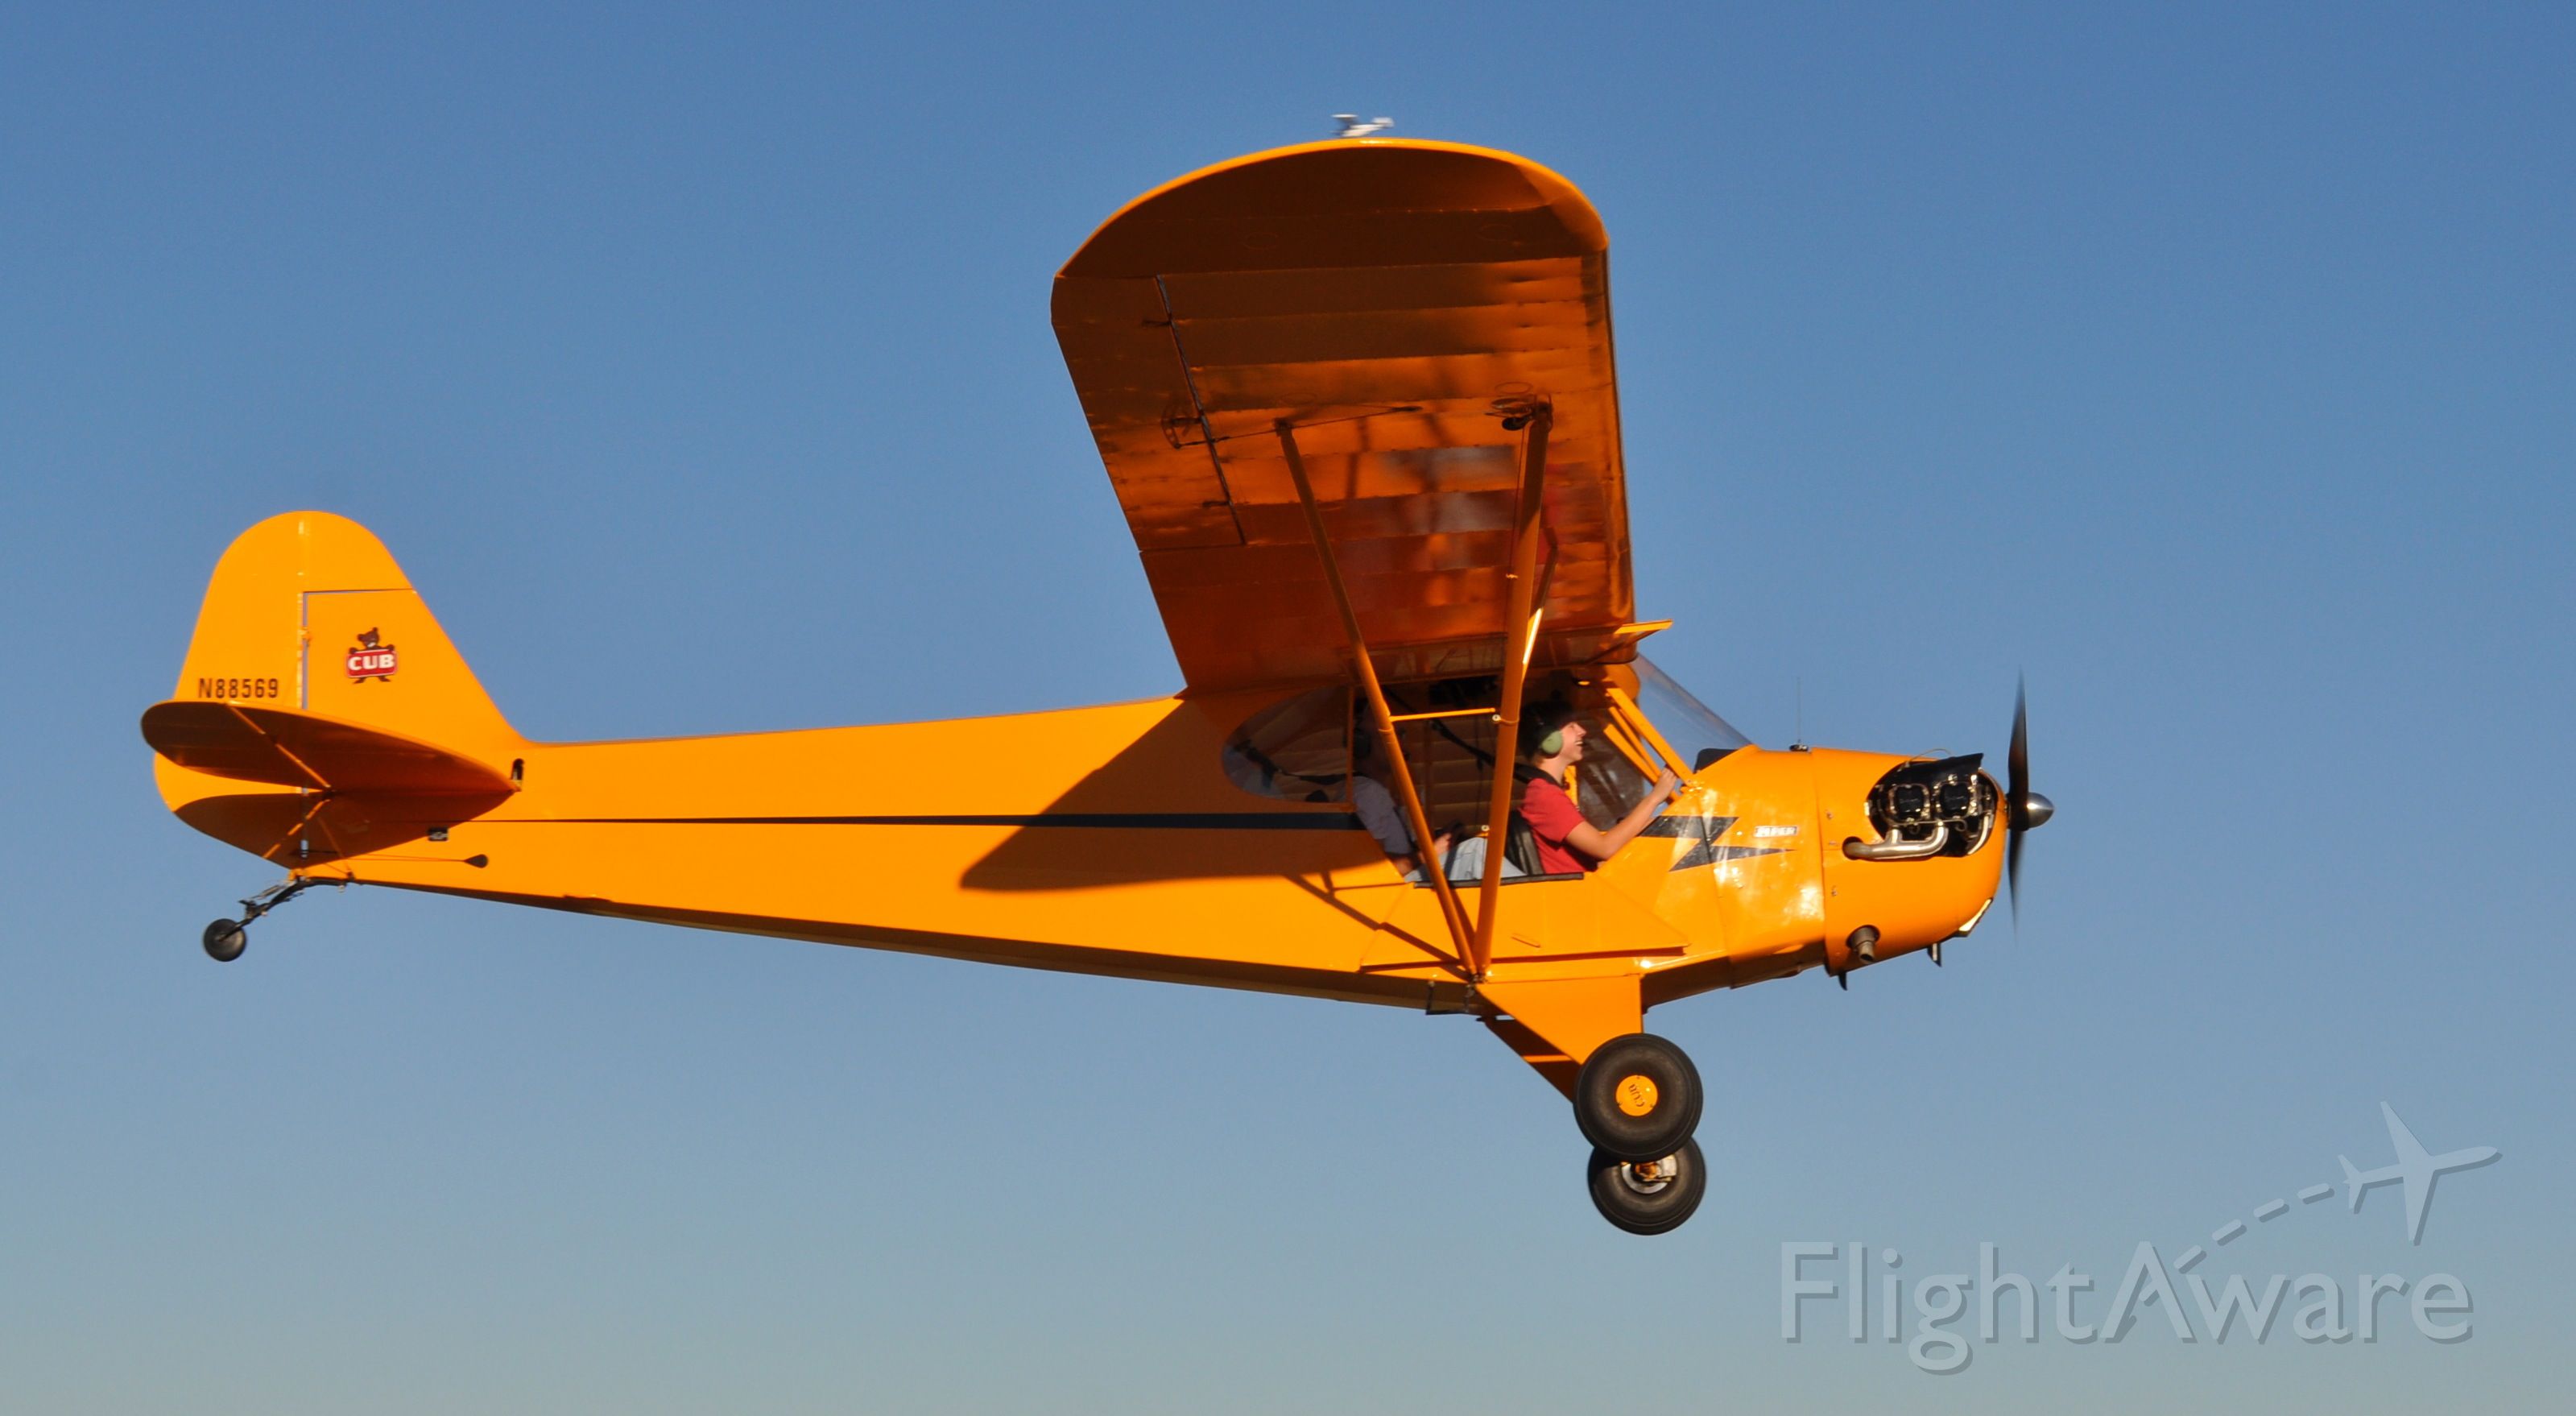 Piper NE Cub (N88569) - My son, with a huge smile on his face, experiencing his first flight (Young Eagle).